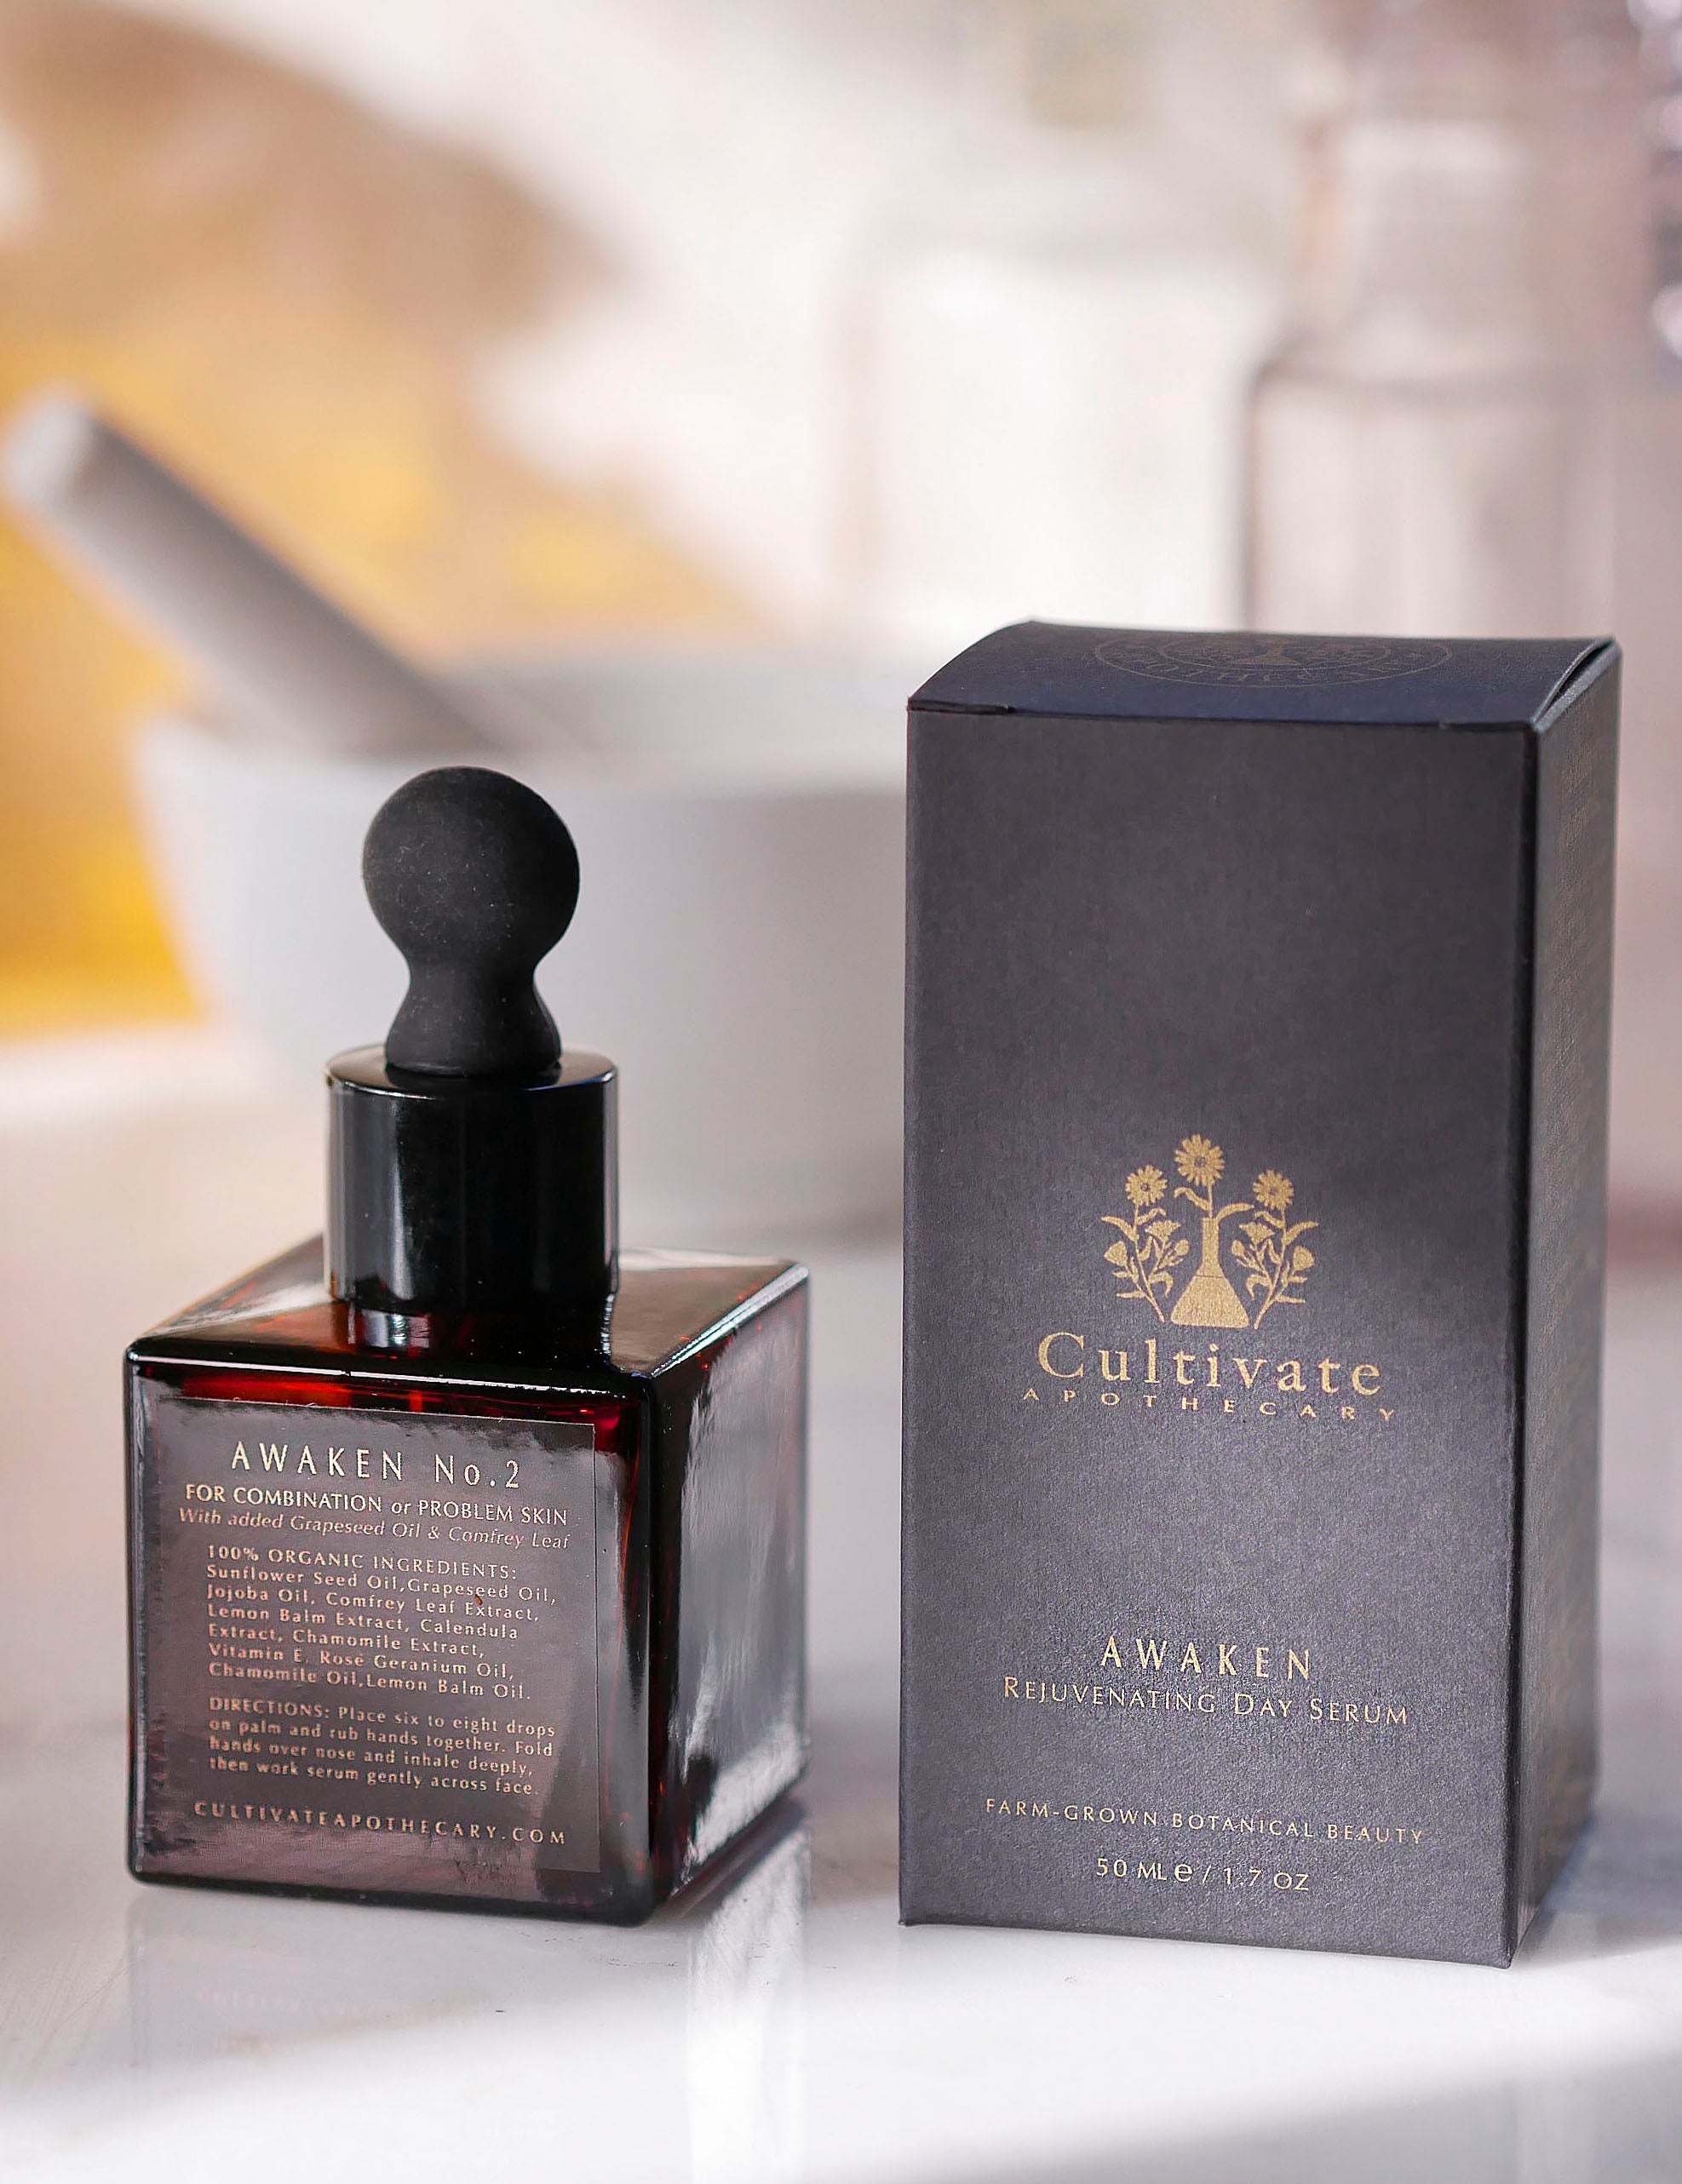 The best face serum for combination skin by Cultivate Apothecary made of botanical, organic, and natural ingredients.